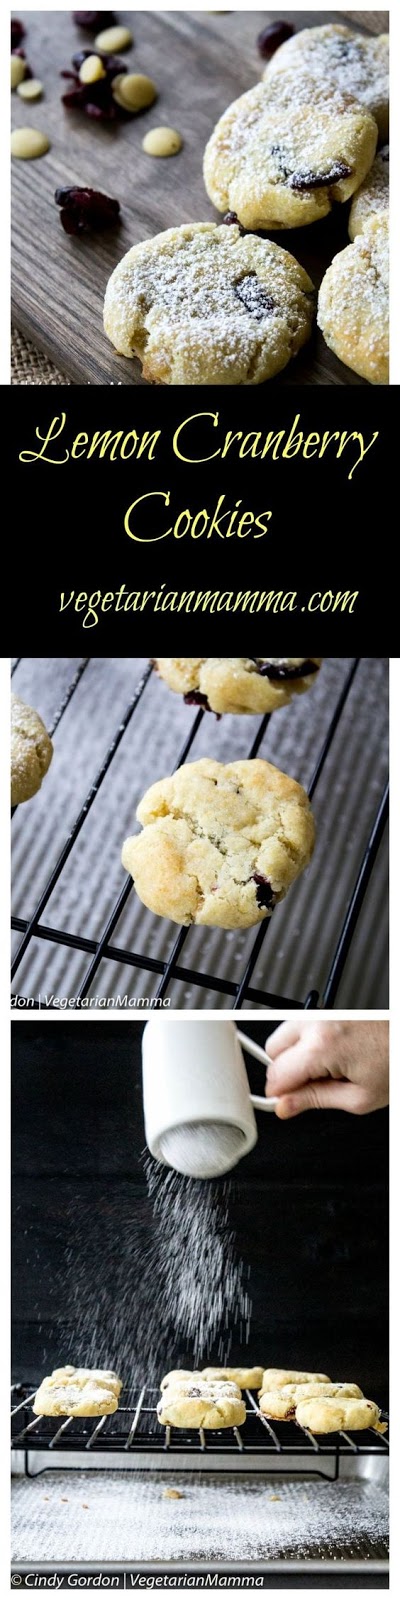 Lemon Cranberry Cookies - These Lemon Cranberry Cookies deliver the perfect amount of sweetness and tartness. You’ll find you cannot stop at just one cookie! These gluten free lemon cookies used dried cranberries. #vegancookies #dairyfreecookies #Pascha #christmascookies #cookies #glutenfreecookies #lemoncookies #cranberrycookies #dairyfreesnacks #dairyfreedessert #vegandessert